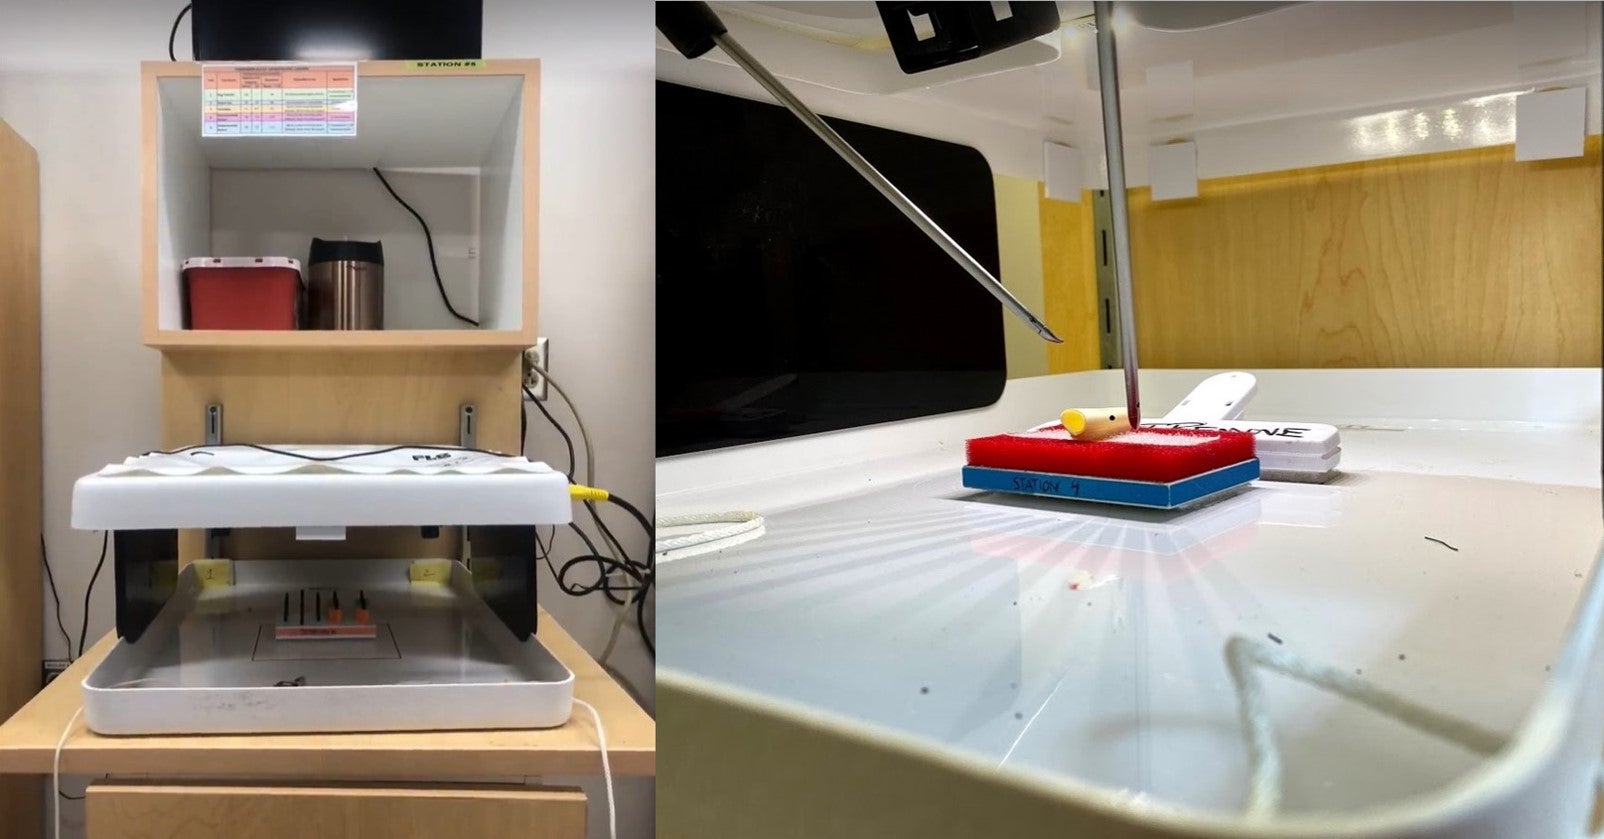 Left: Standard FLS task setup – tools would be inserted into the top of the white box and used to manipulate the task inside the box; Right: our team attempting to perform the FLS suturing task at Baylor College of Medicine Sim Lab